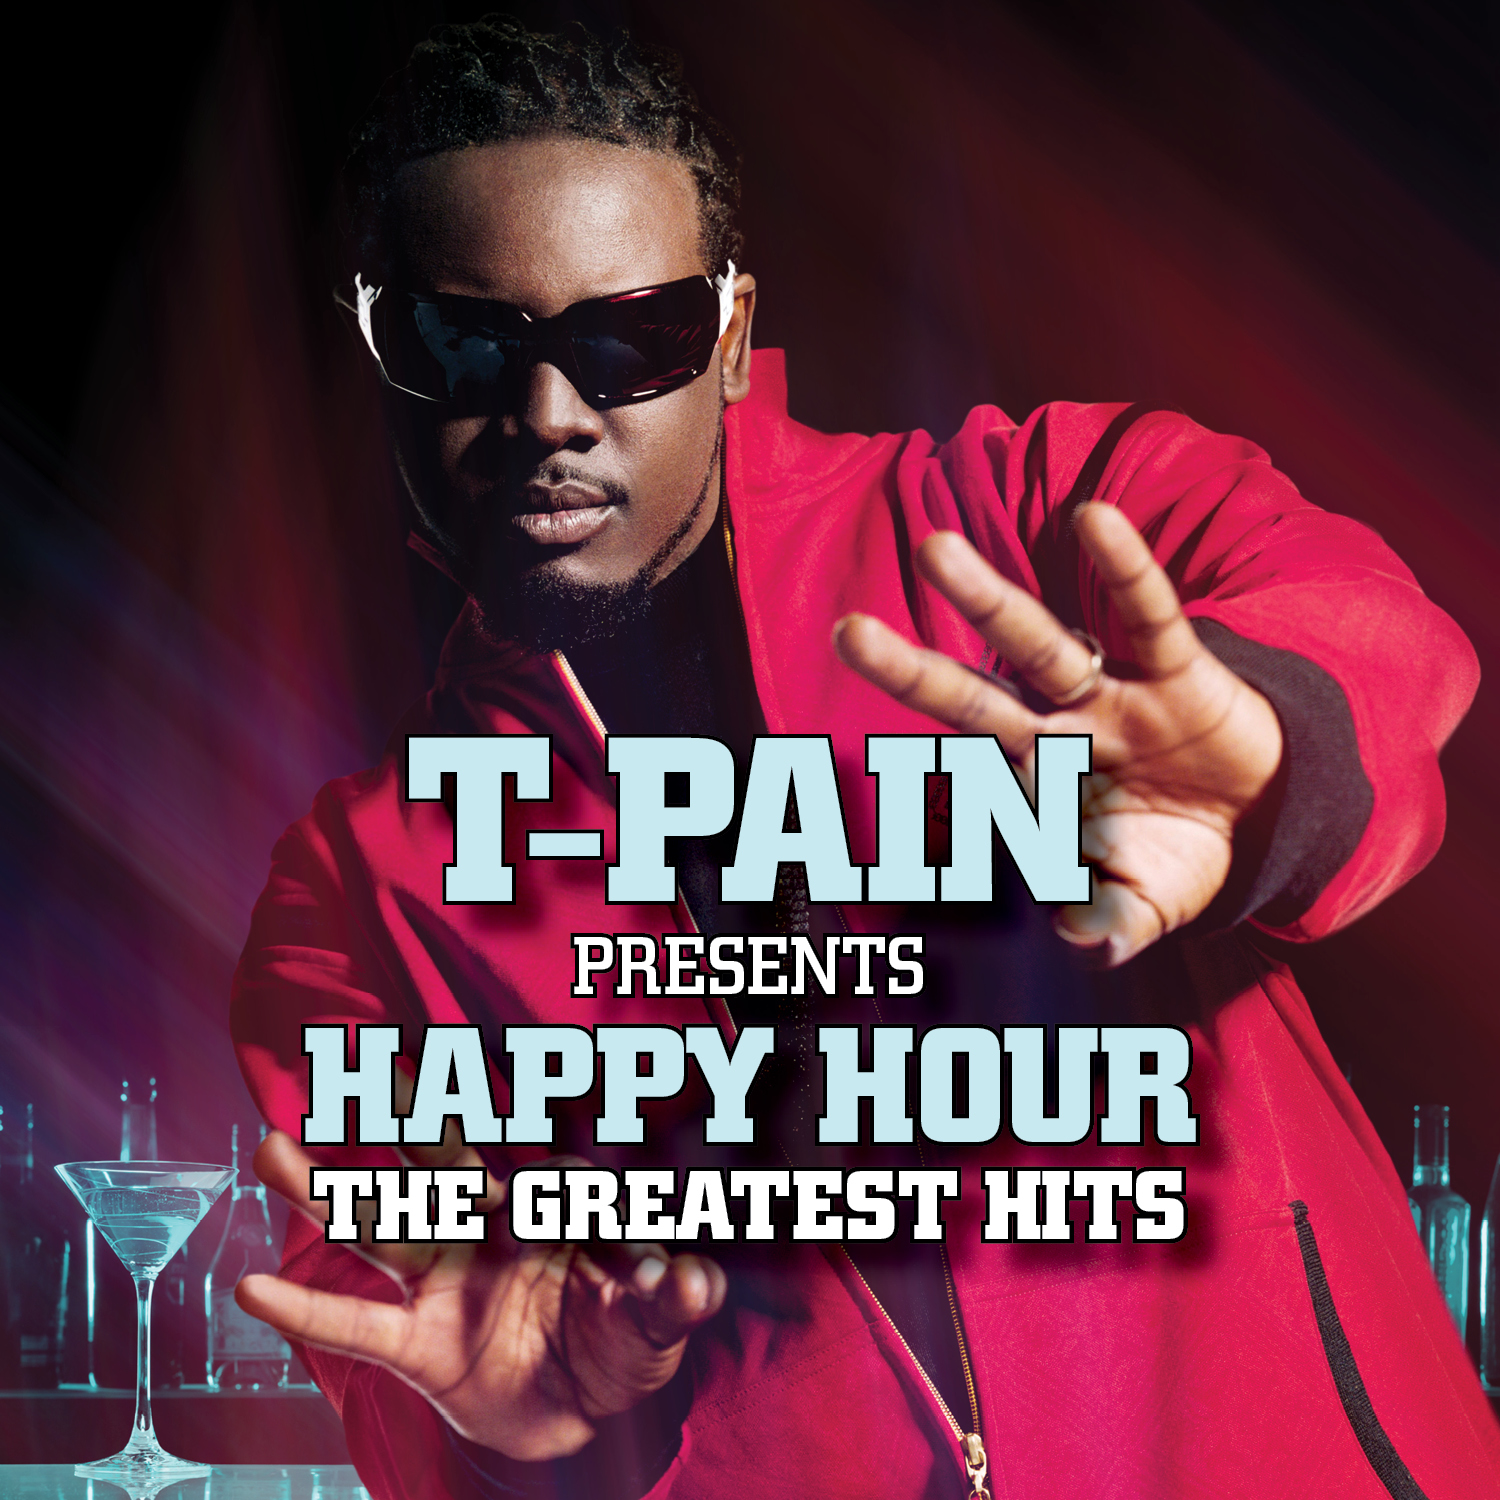 T-PAIN - T-PAIN PRESENTS HAPPY HOUR: THE GREATEST HITS